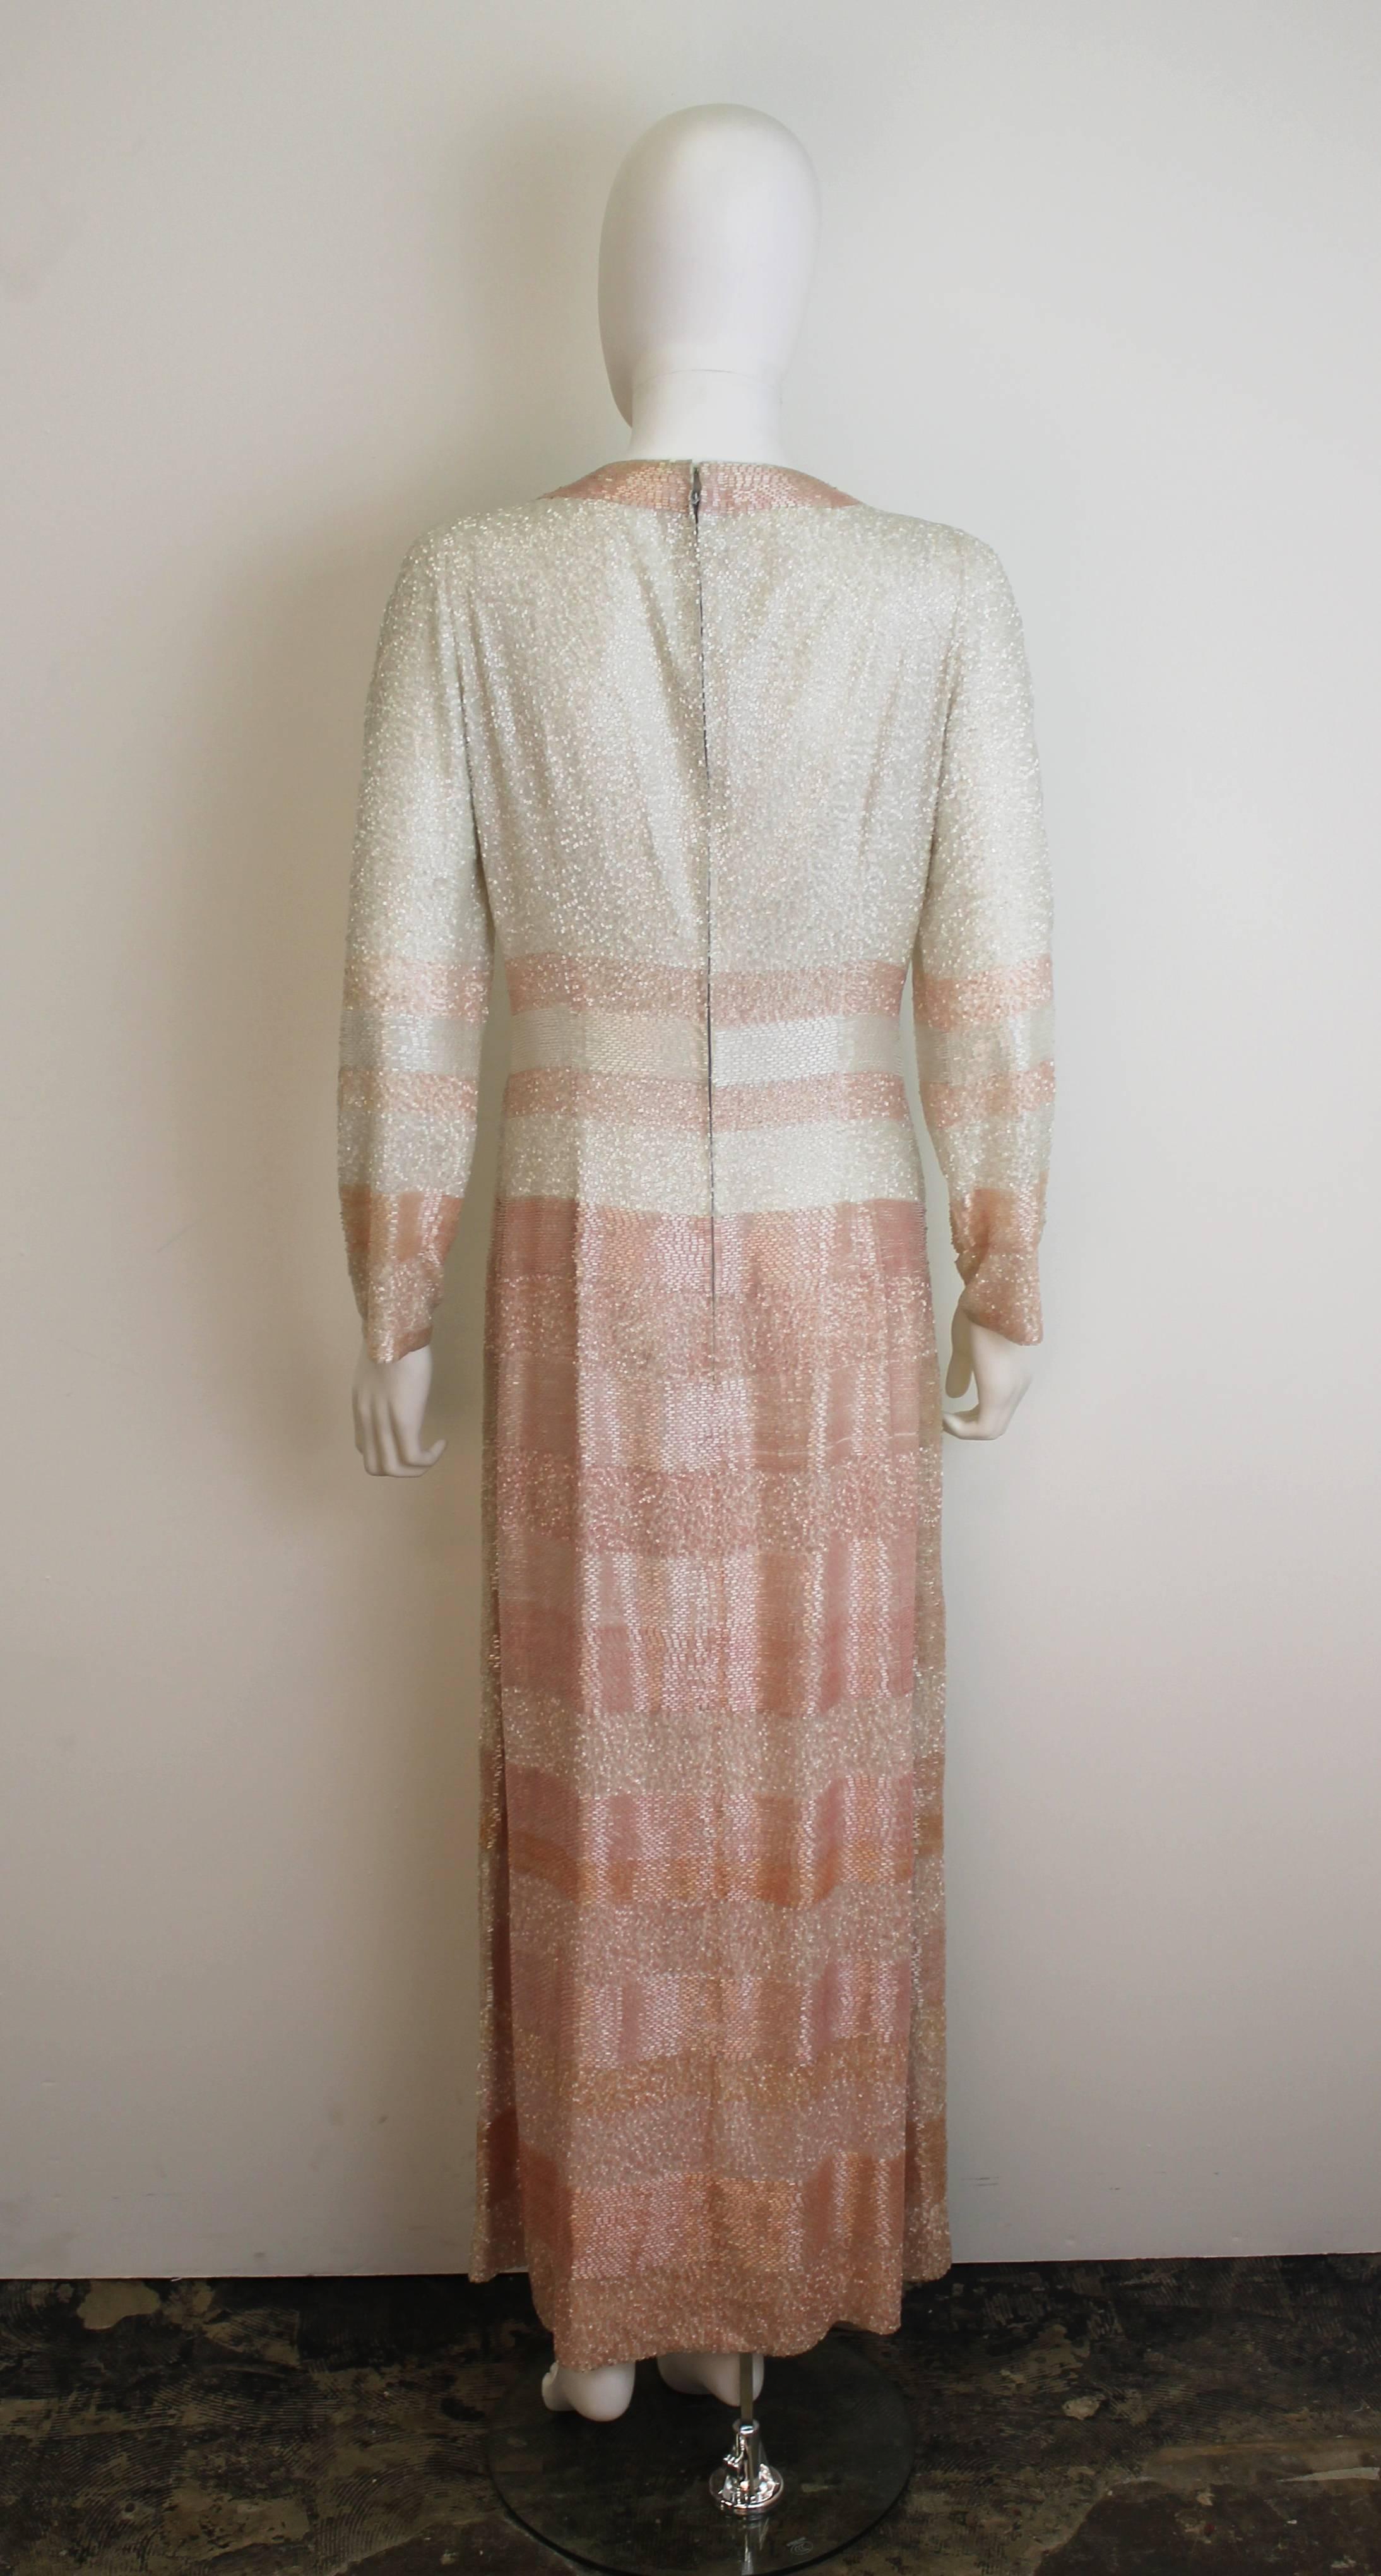 Museum-quality Christian Dior beaded gown from the 1960's. Features pink and white beads of different textures and tie collar. Pattern cutters notes can be seen on interior seems. 